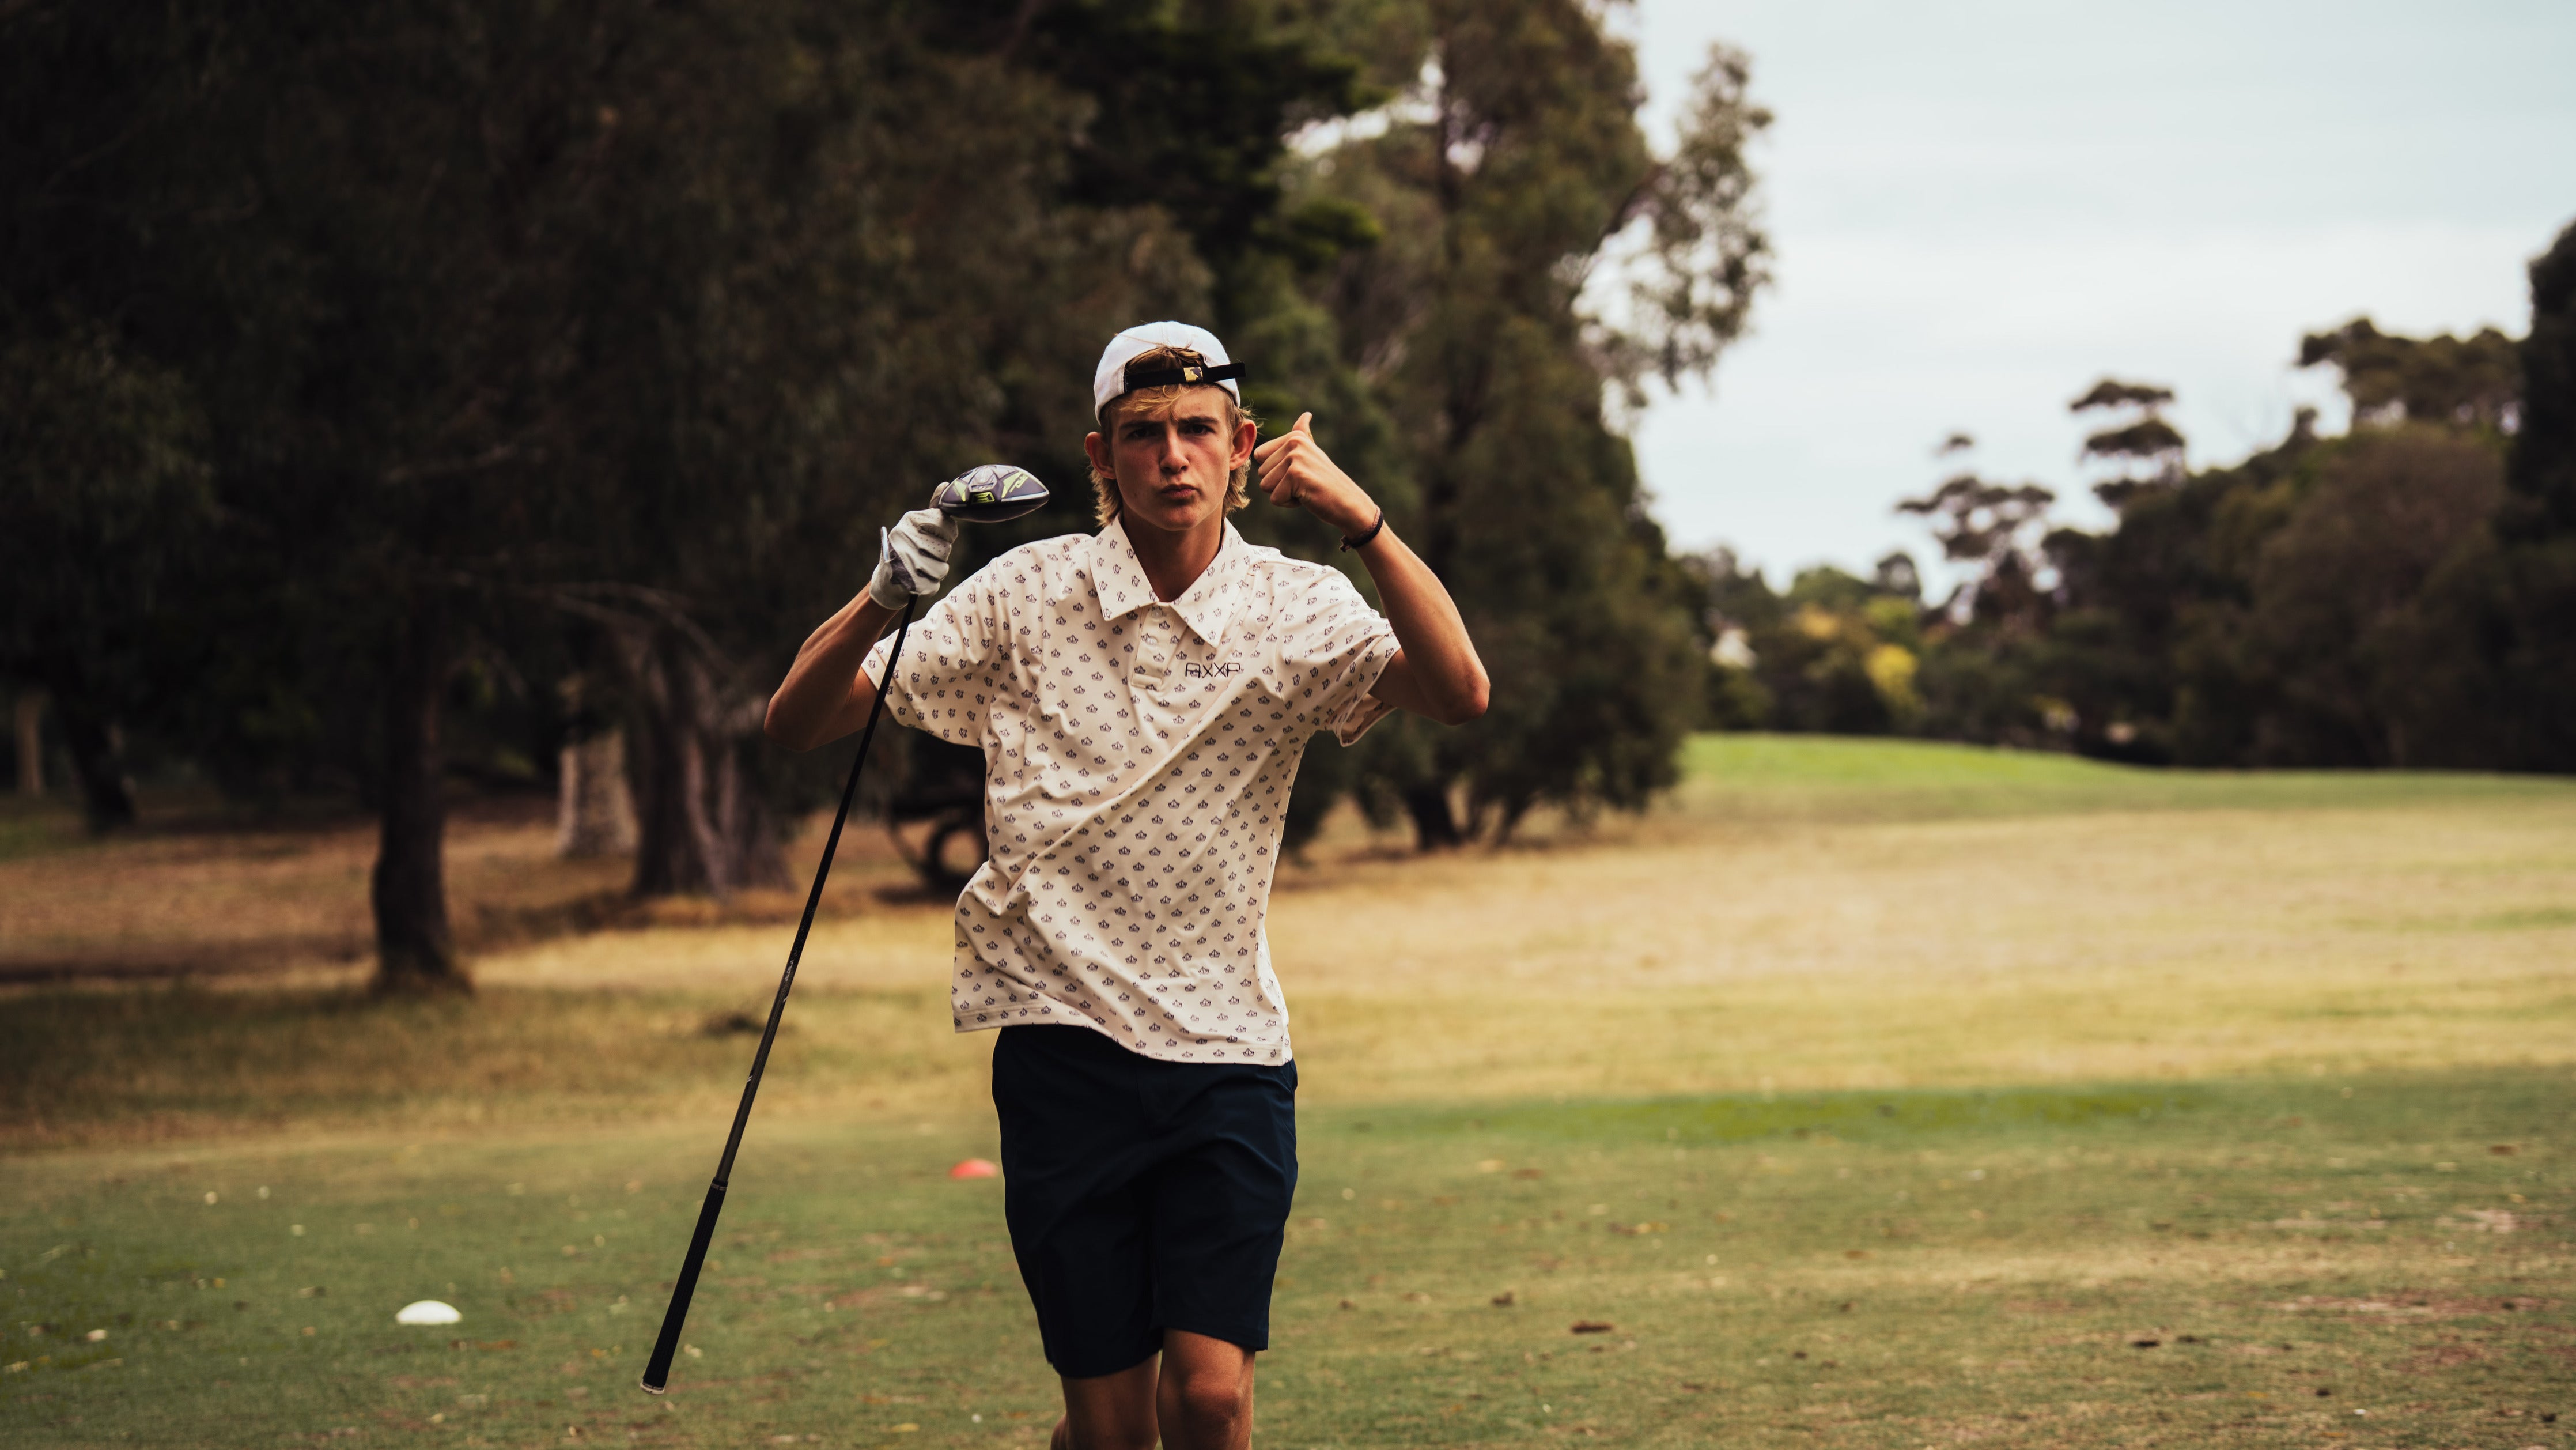 5 Reasons Golf is Cooler than You Think (And Why You Should Try It)